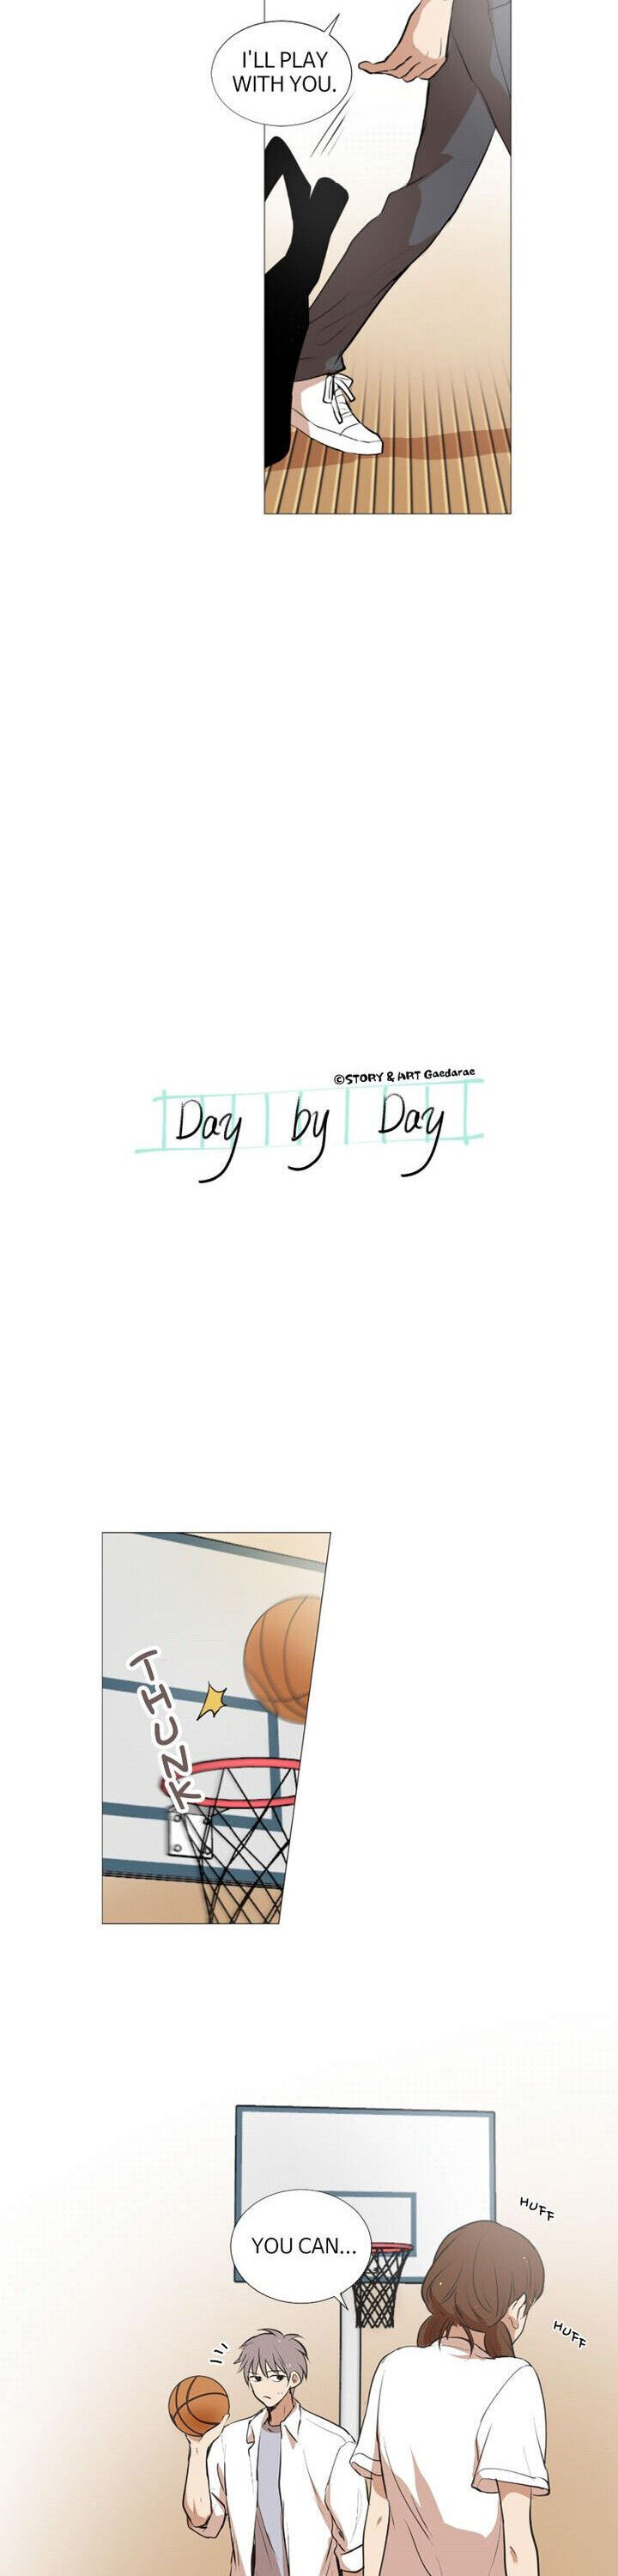 Day By Day - Page 2